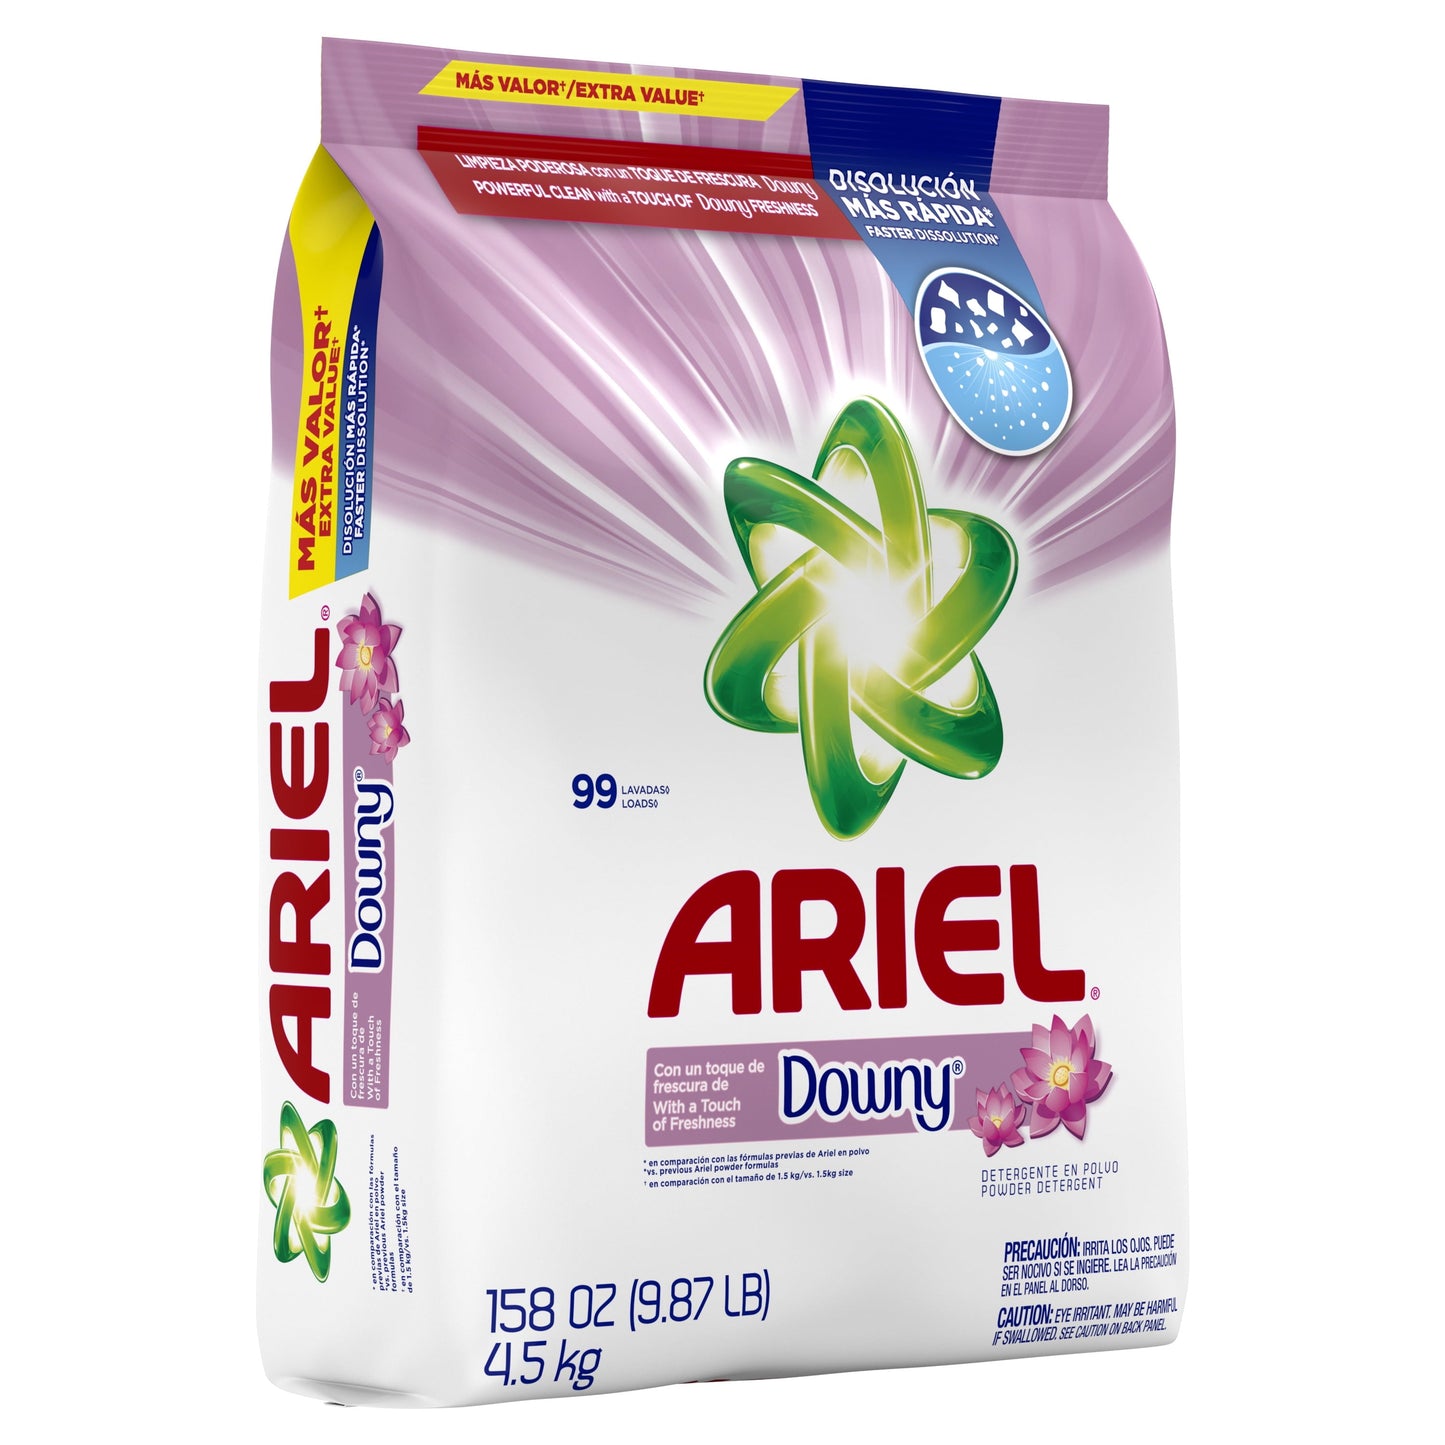 Ariel with a Touch of Downy Freshness, Powder Laundry Detergent, 158 oz, 99 Loads